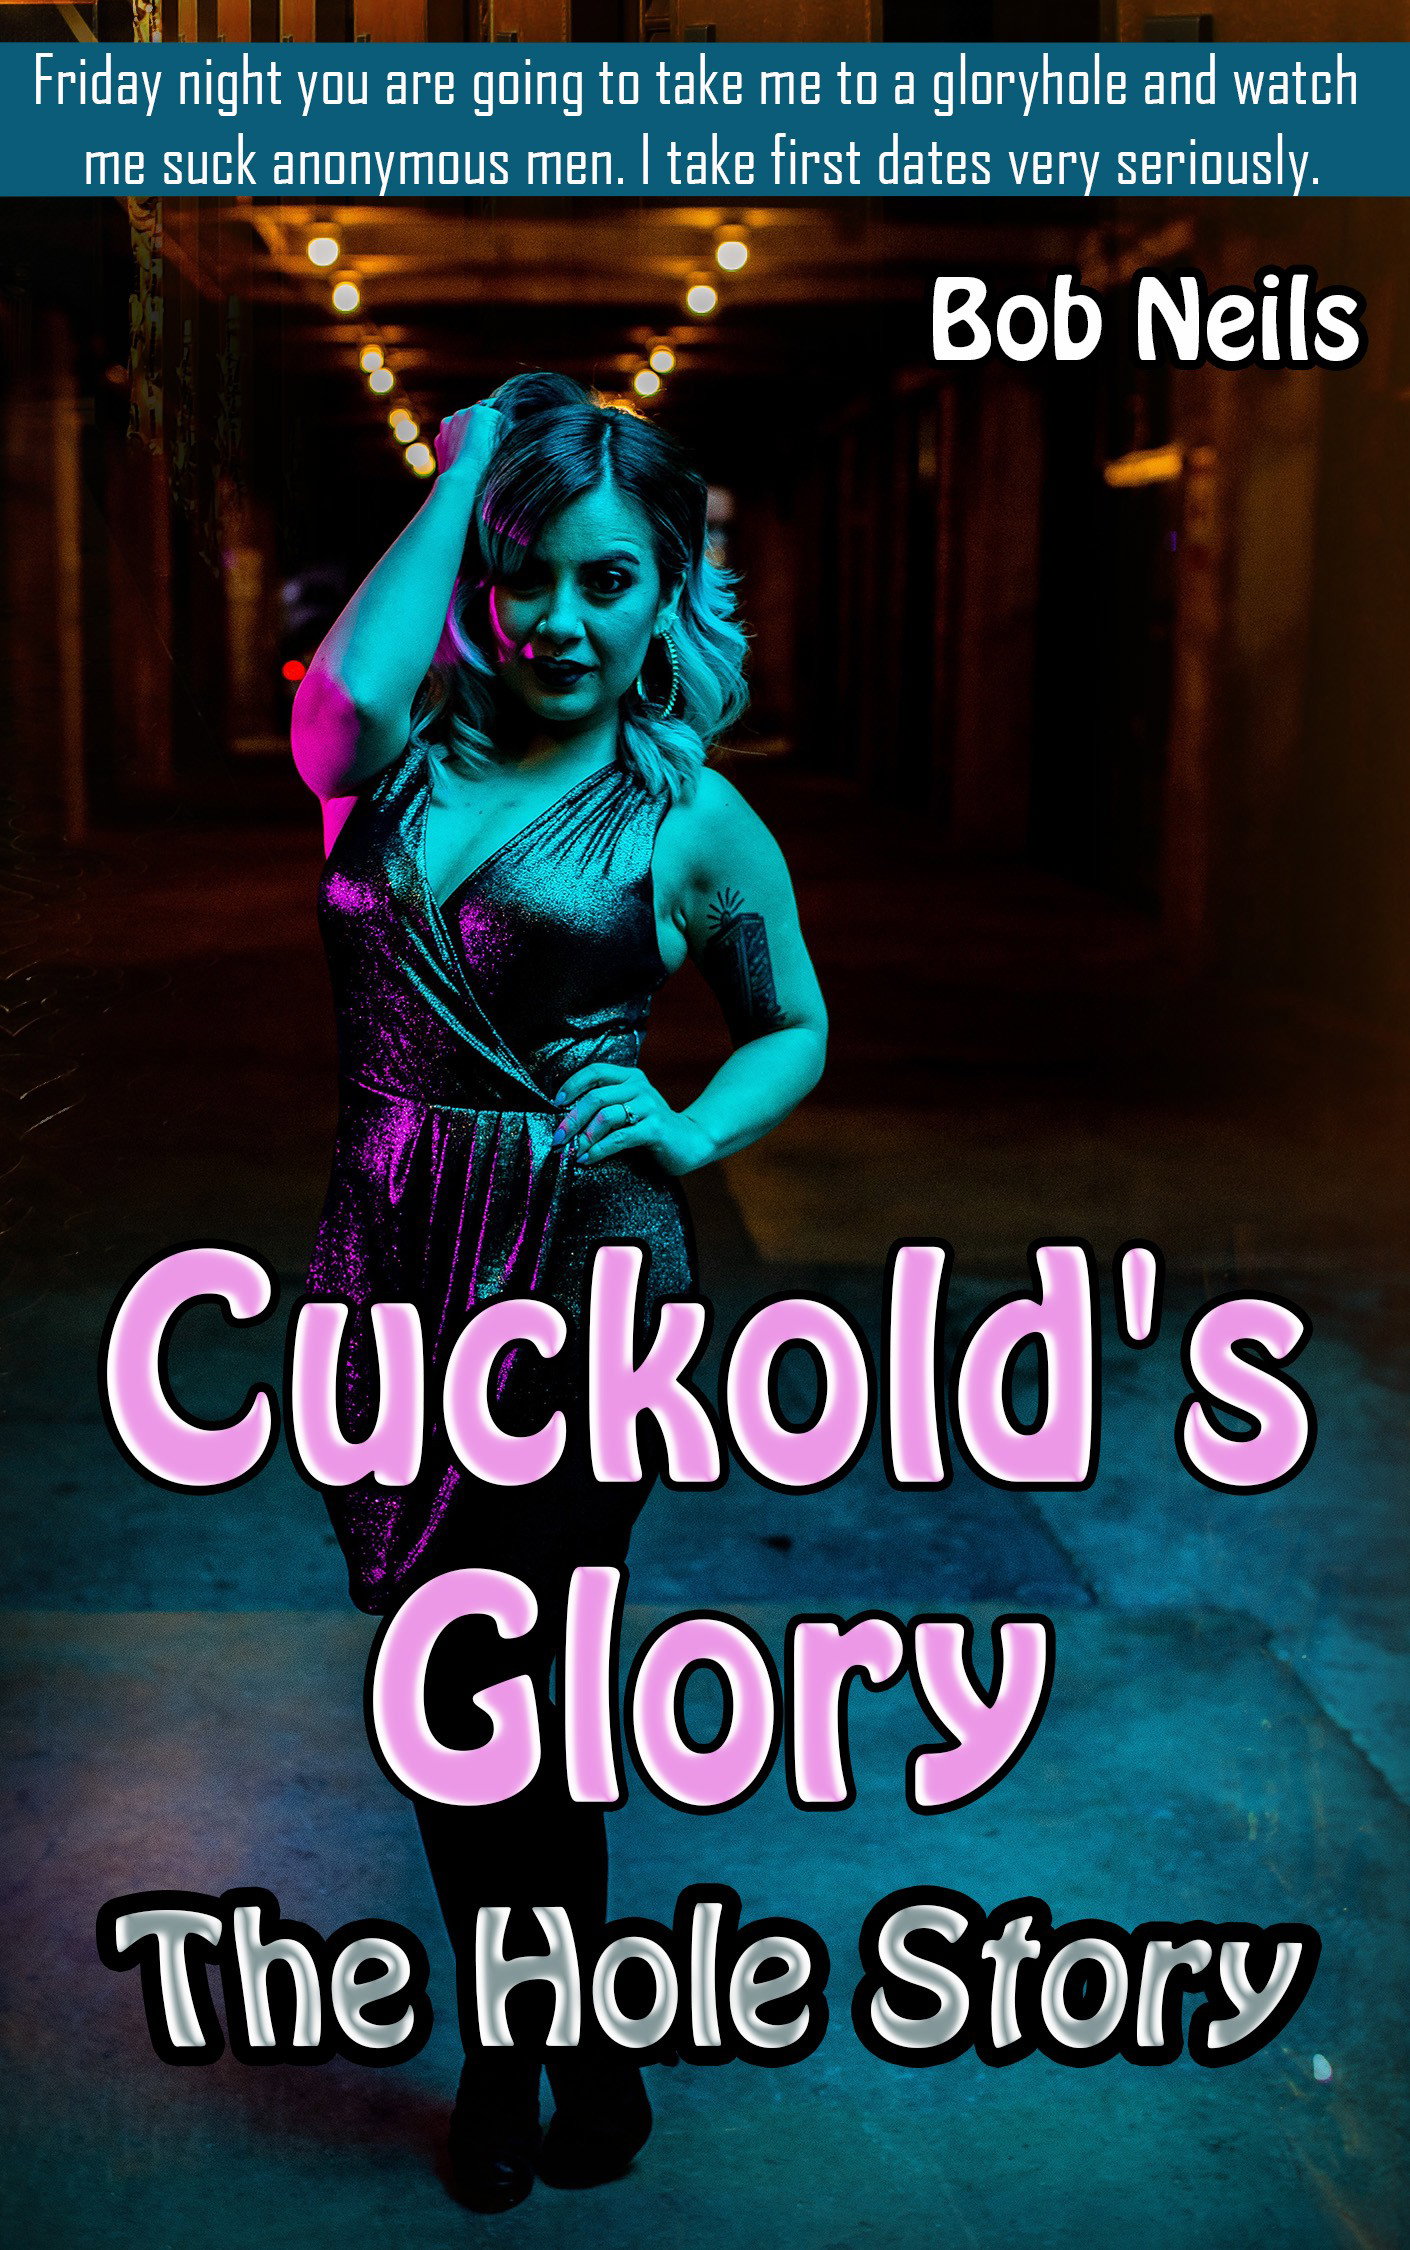 Photo by Bob Neils with the username @cockobsessedauthor,  May 15, 2019 at 12:42 AM. The post is about the topic Erotica Books and the text says '"Delivers a debauched lifestyle even for those experienced in the lifestyle."

Debauched is right. Cuckold's Glory: The Hole Story is for hardcore lovers of bisexual gloryhole erotica and cuckold hotwife humiliation.

See more at'